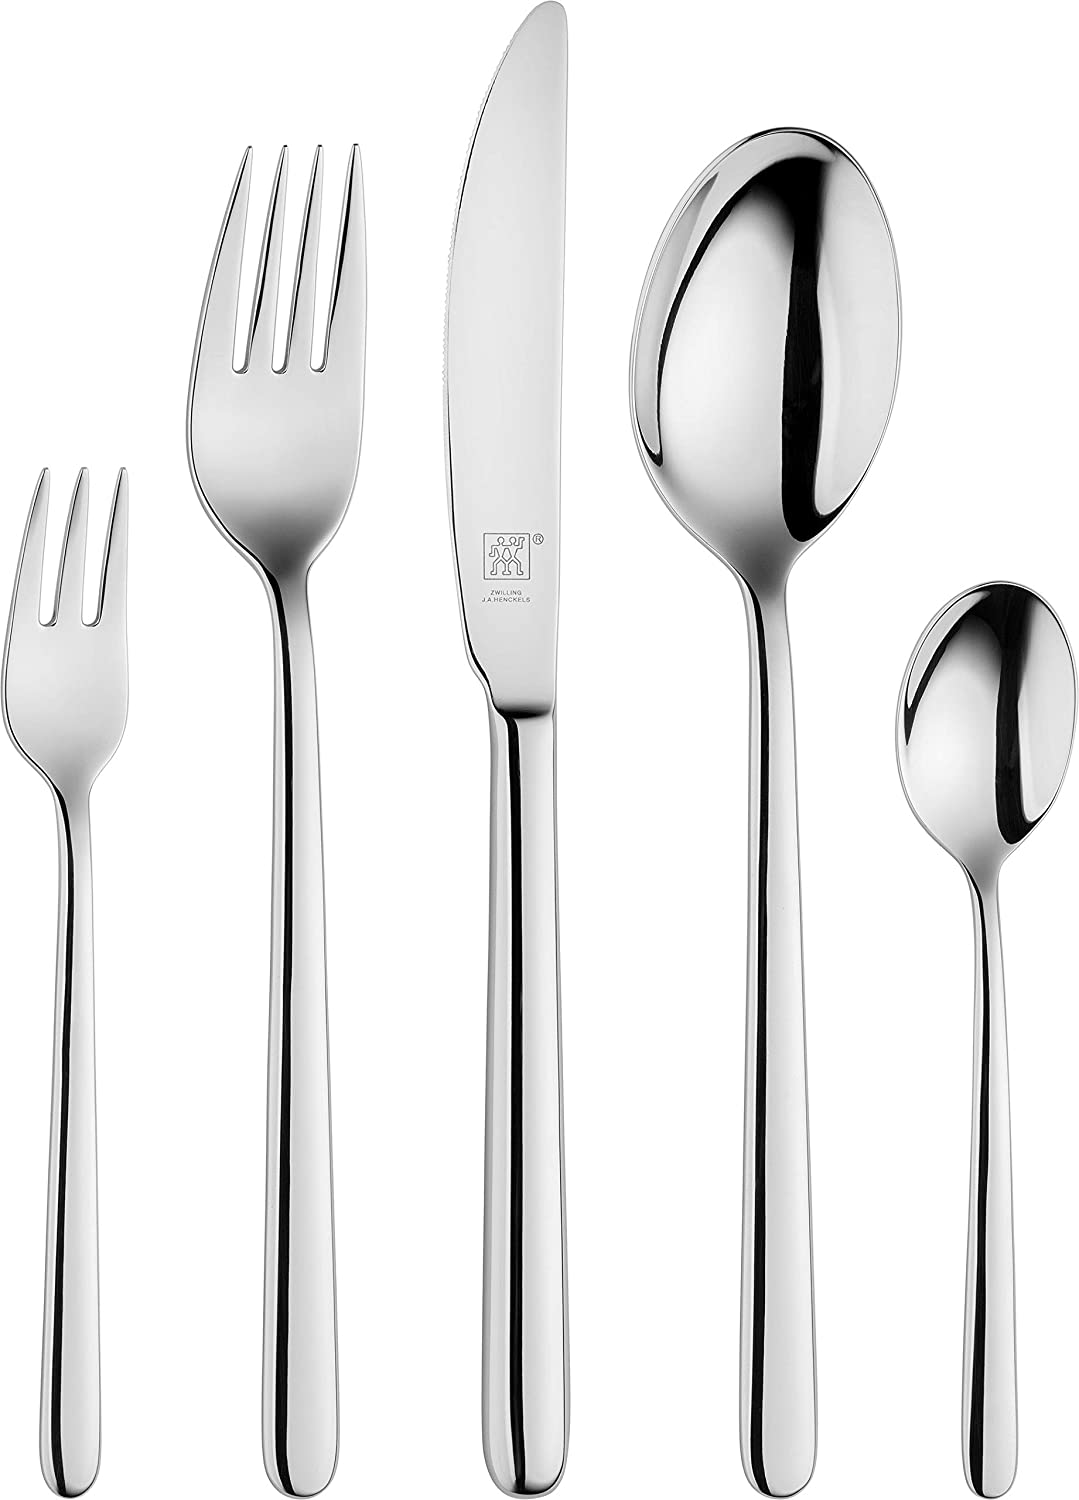 Zwilling 1000953 30-Piece Cutlery Set for 6 People, 18/10 Stainless Steel/High Quality Blade Steel, Polished, Newcastle